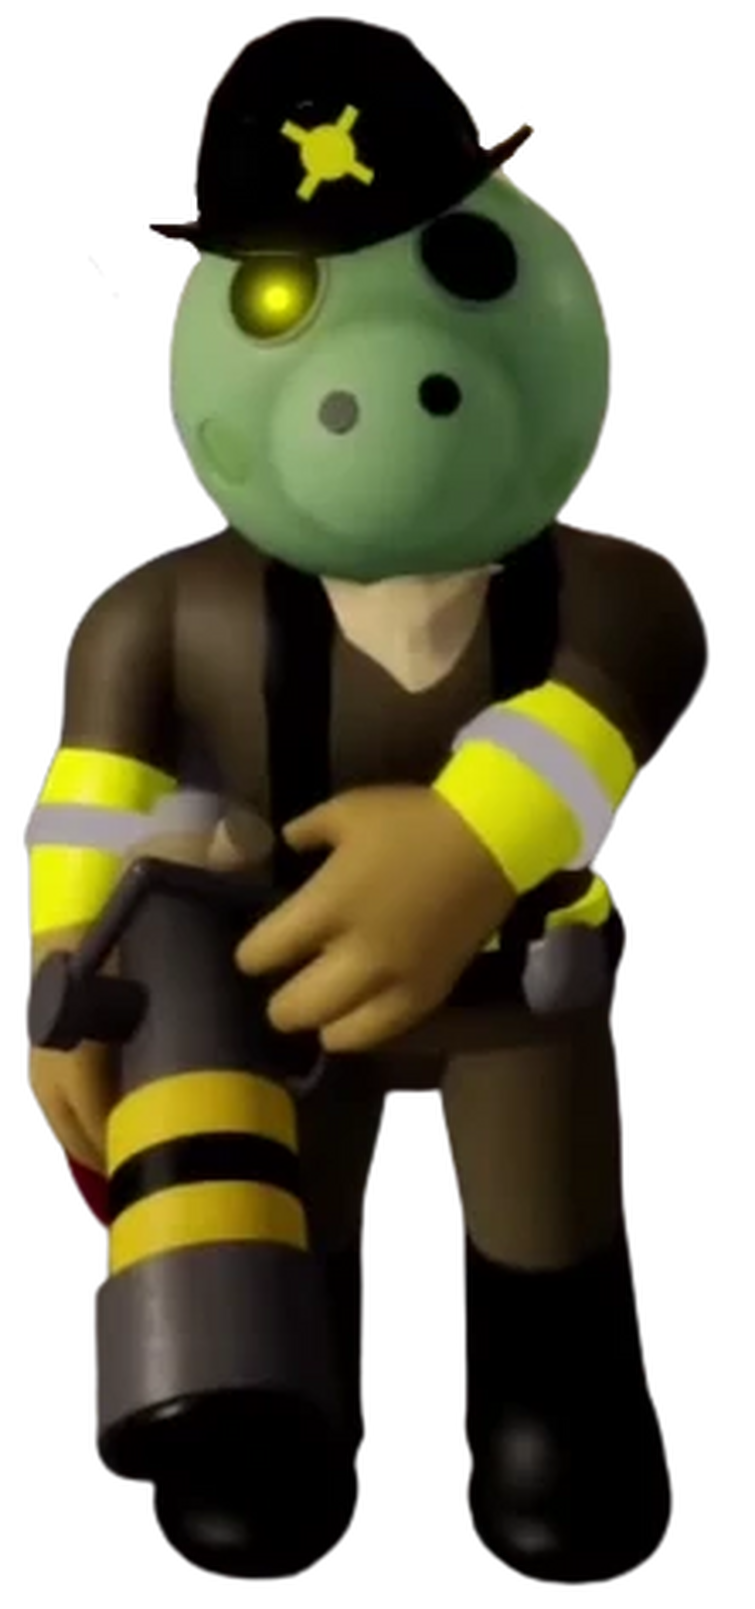 Basically what i imagine TIO is without he's suit : r/RobloxPiggy